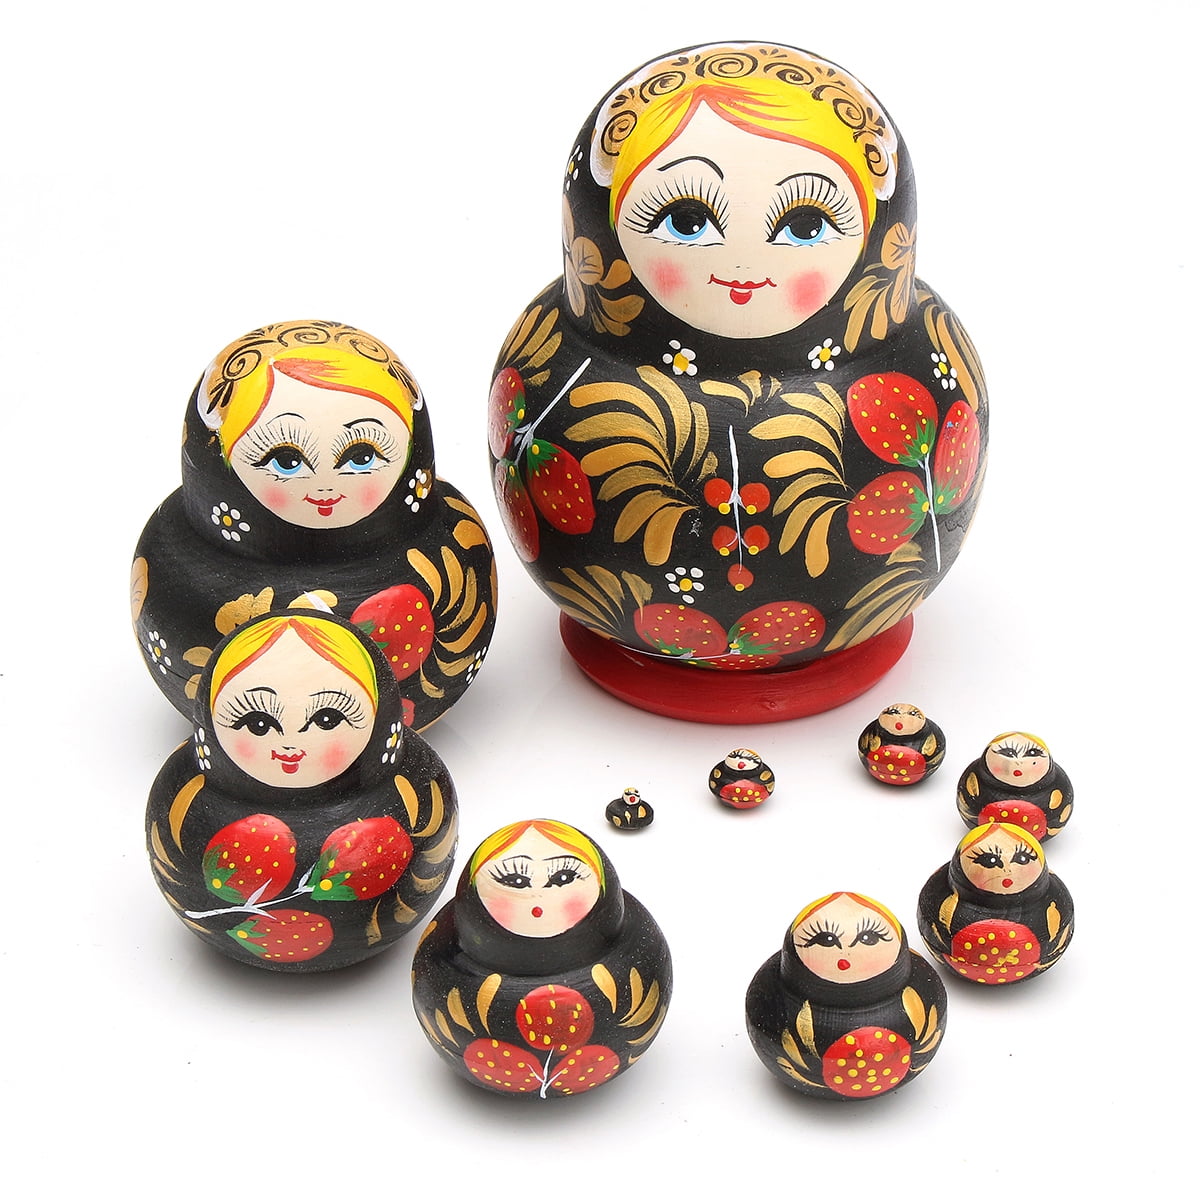 Amosfun dolls nesting russian doll for mexican and kids toys wooden toddlers-1 PC Superposed Dolls Winter Doll Pattern Lovely Russian Stacking Doll Russian Dolls Collection Toy